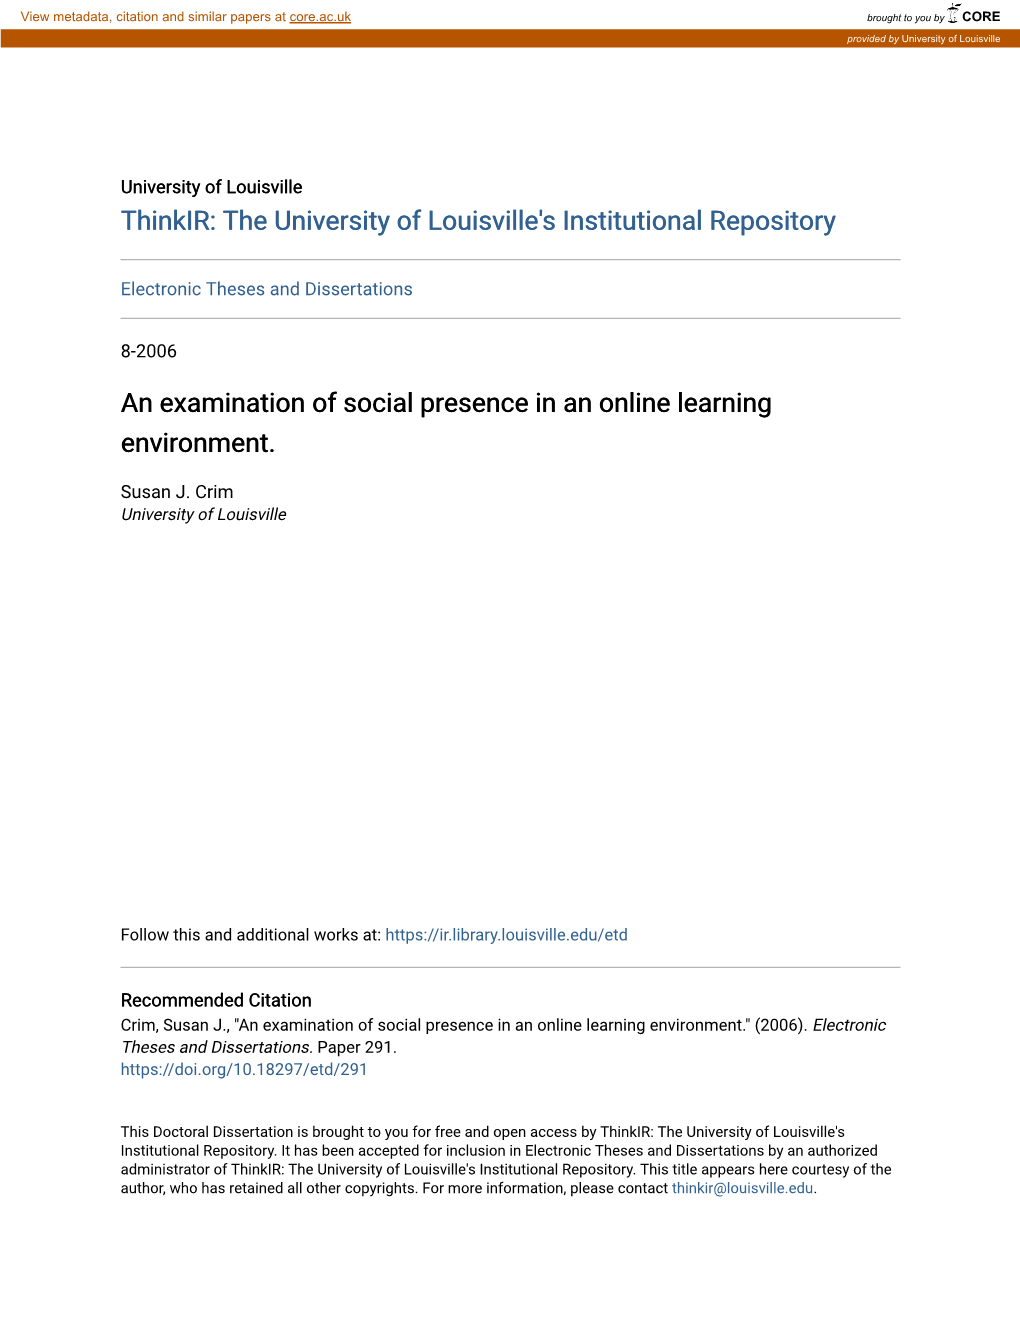 An Examination of Social Presence in an Online Learning Environment